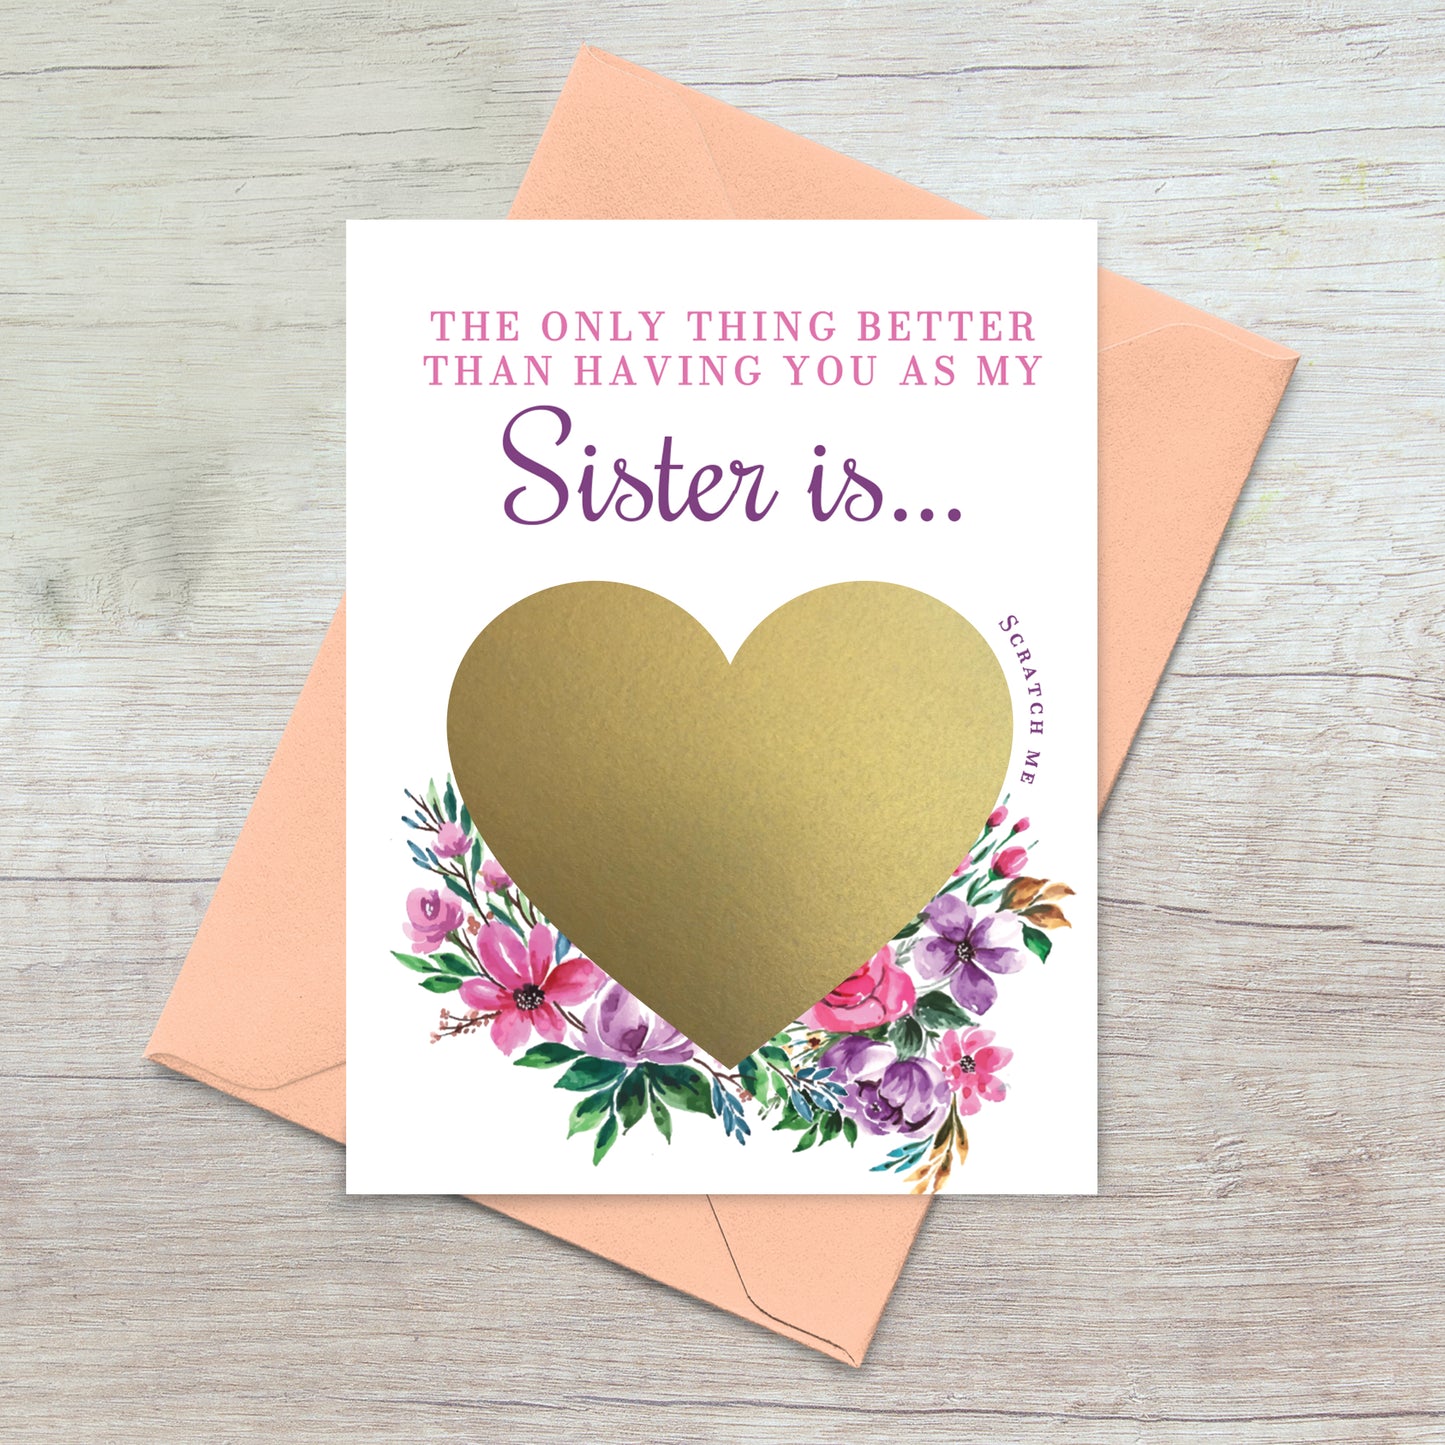 pink and purple will you be my maid of honor proposal card for sister with gold scratch-off heart - XOXOKristen